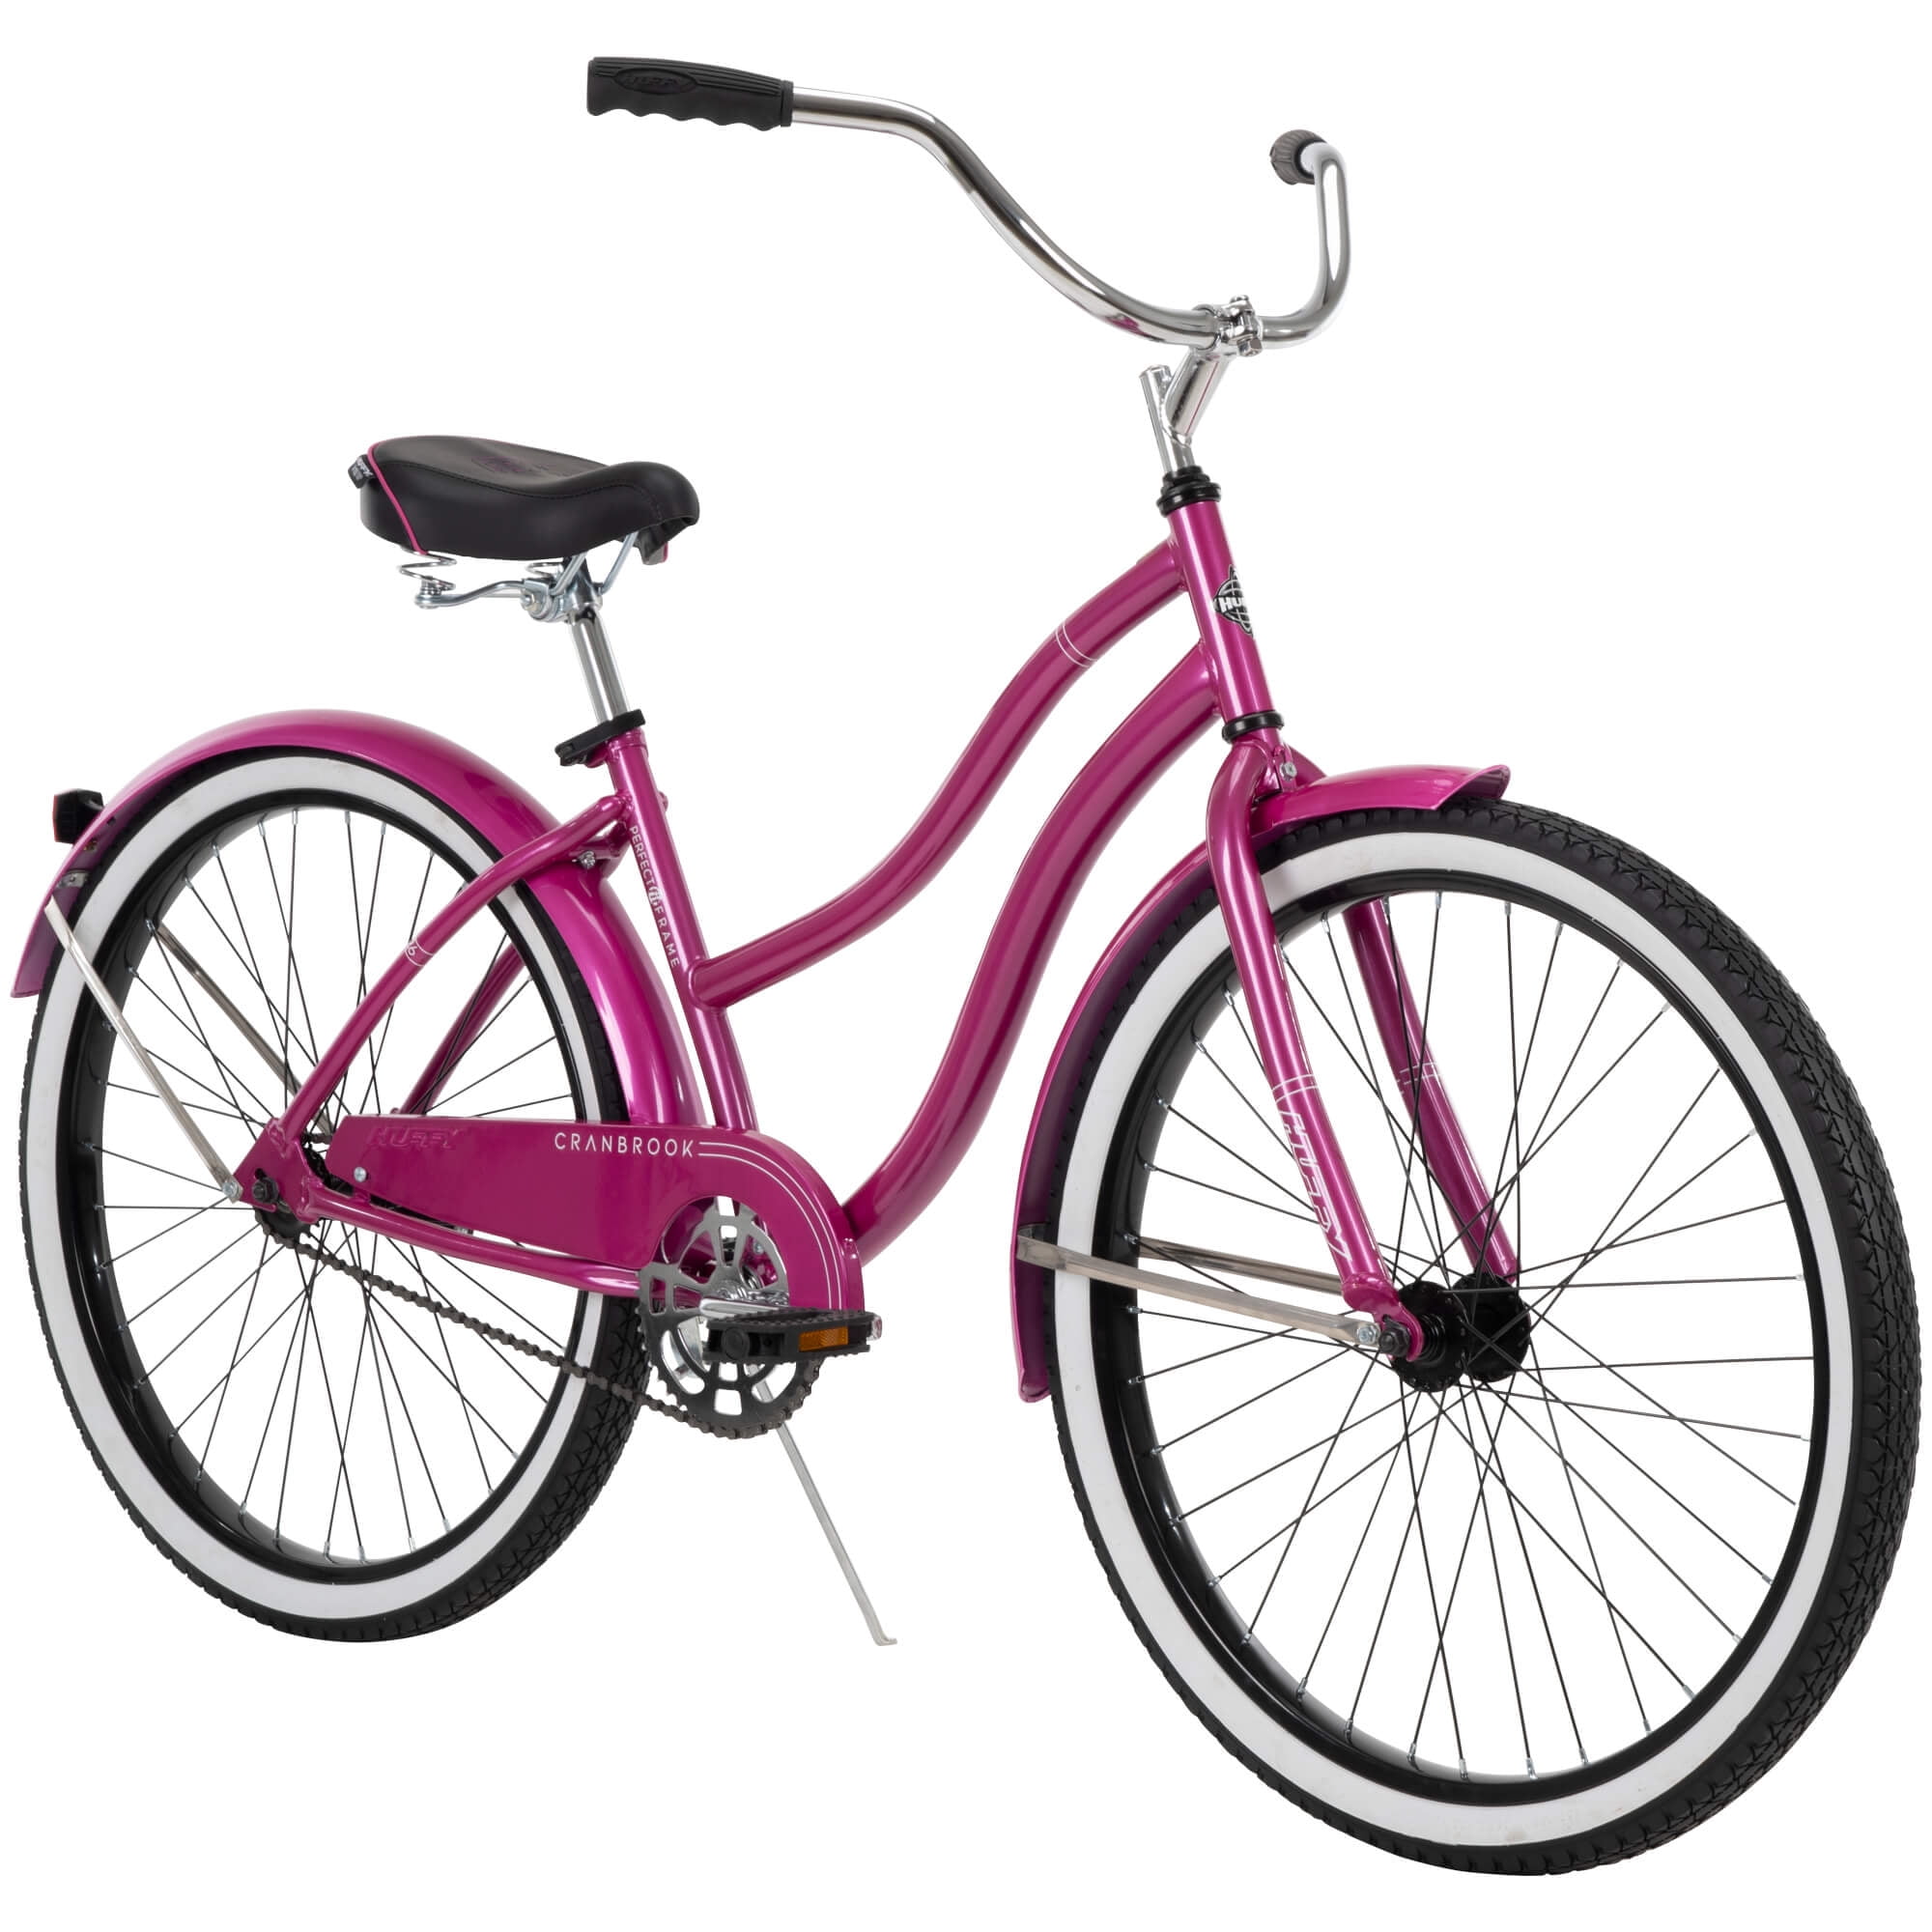 Huffy 26" Cranbrook Women's Cruiser Bike with Perfect Fit Frame Black Pink